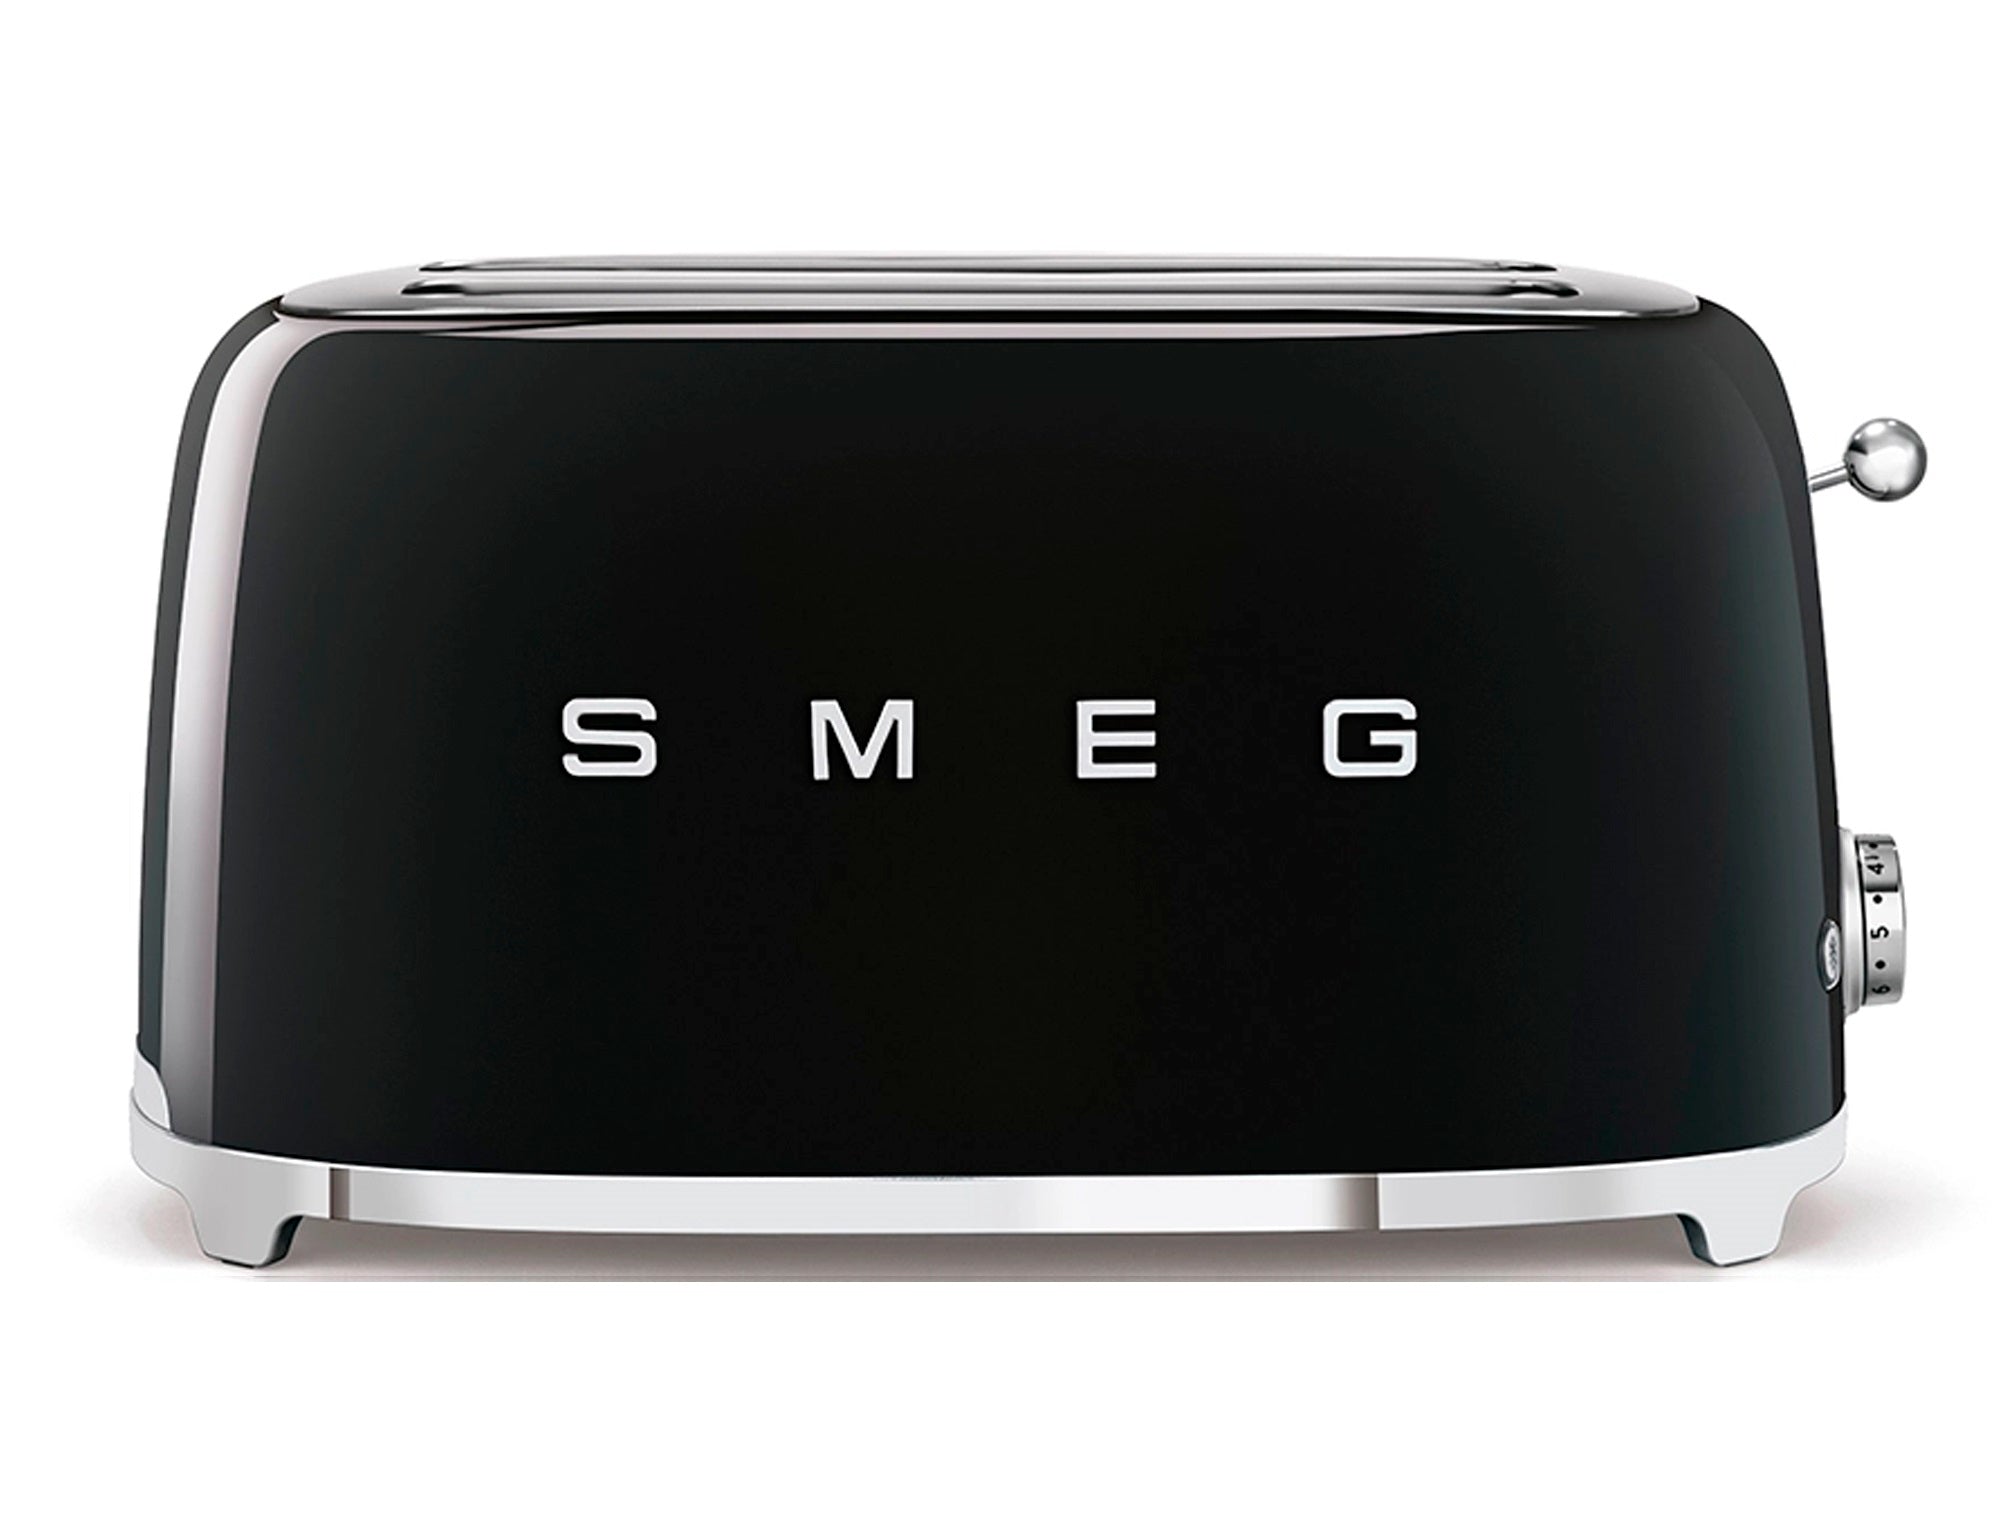 Smeg Toaster extra-wide 50's Style Aesthetic